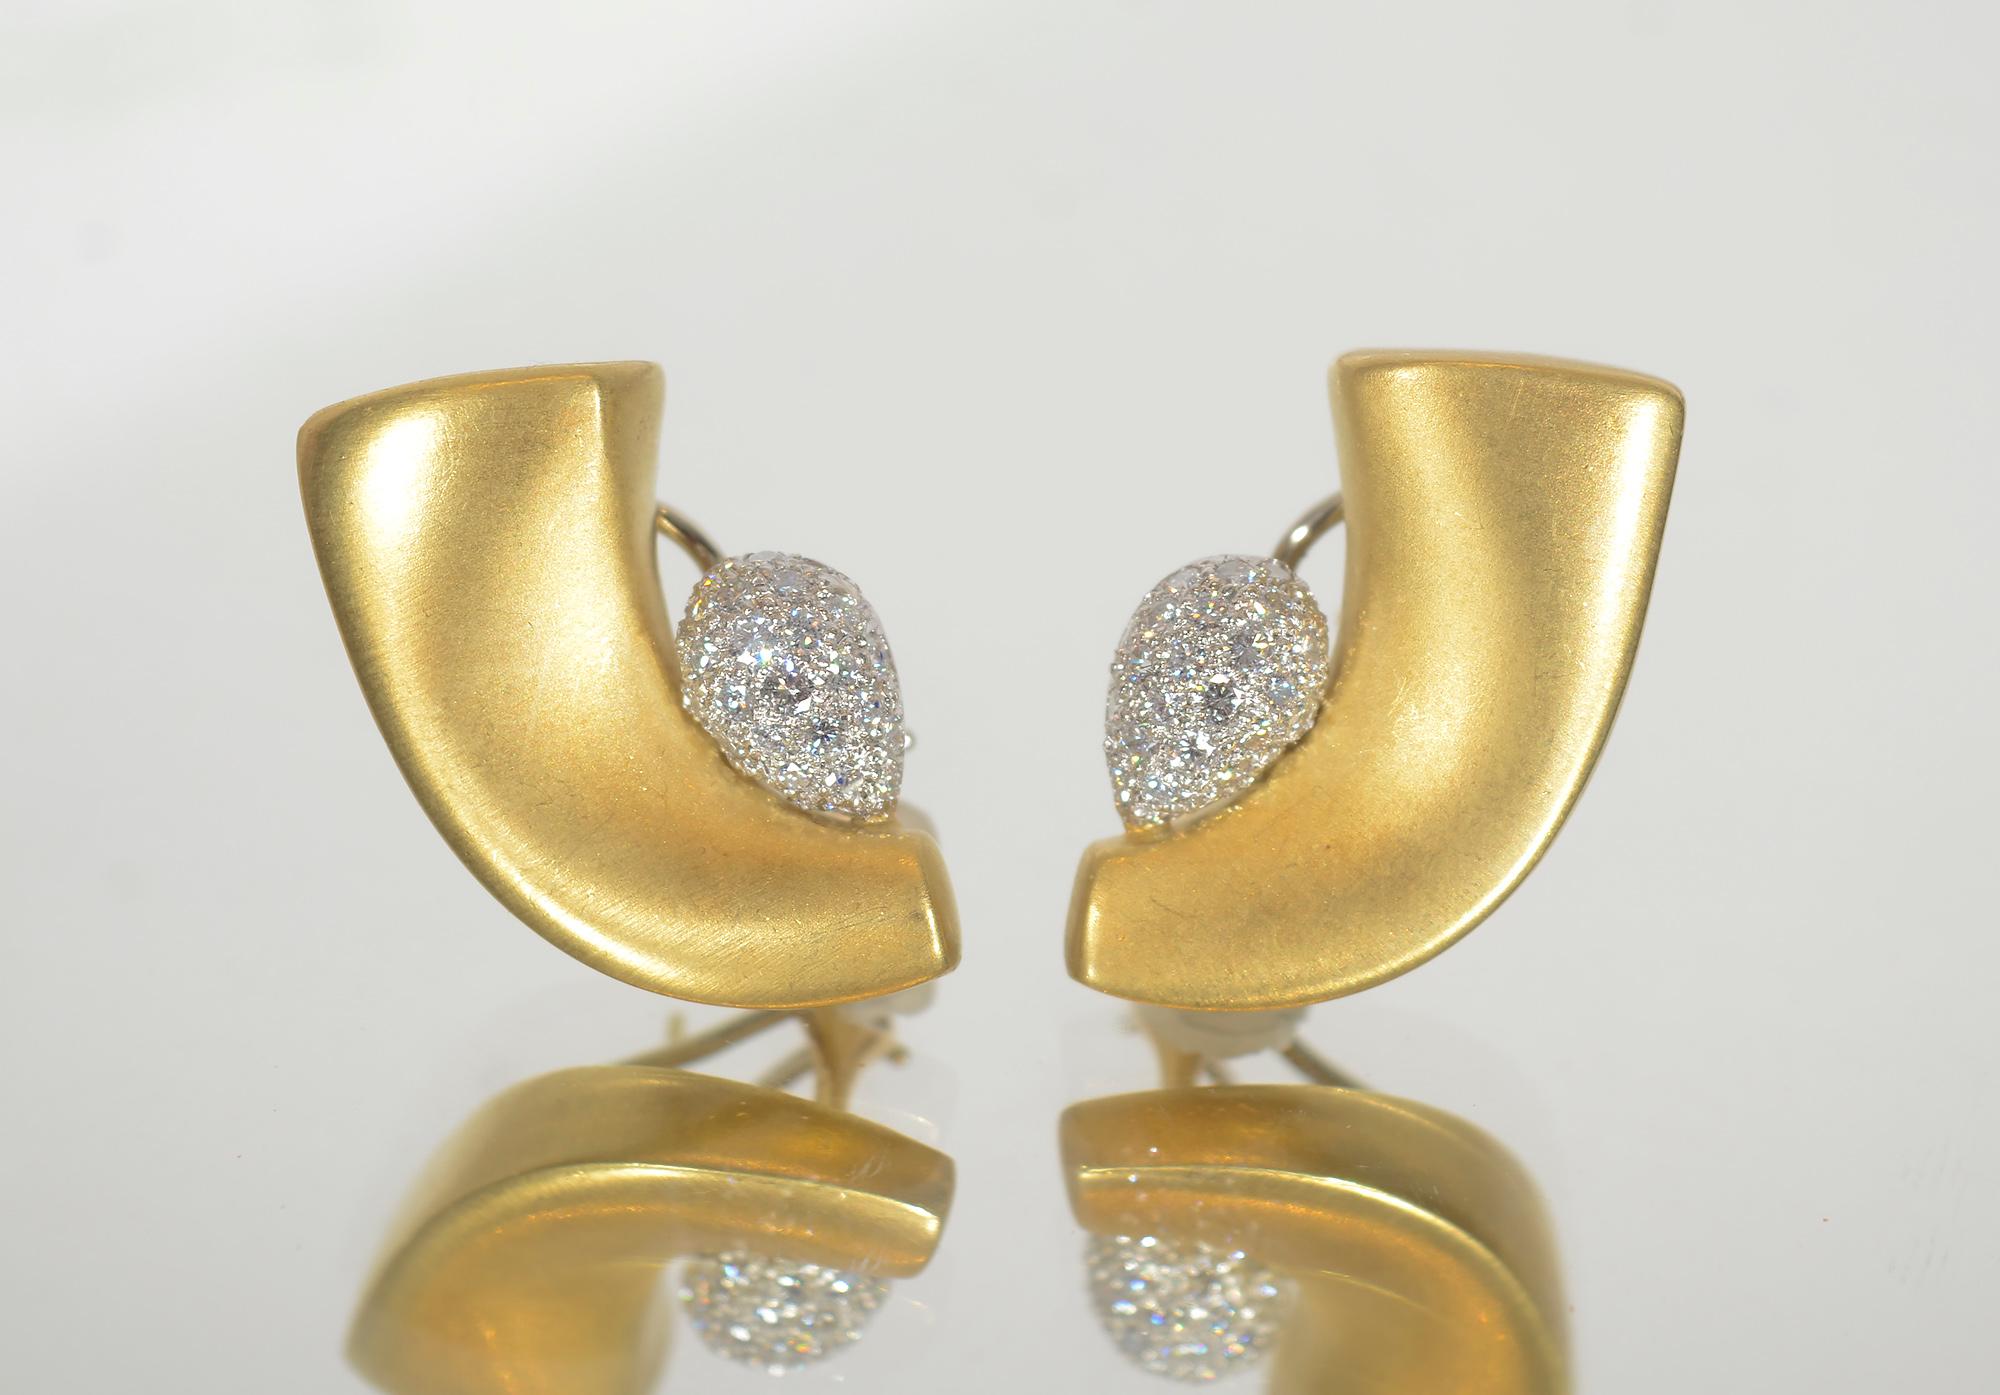 Crescent shaped 18 karat gold earrings  with a soft burnished finish by contemporary designer, Marlene Stowe.  Within the crescent is a pear shaped cluster of pave diamonds. The earrings measure 1 1/4 inches in length and 3/4  inch at the diamonds.